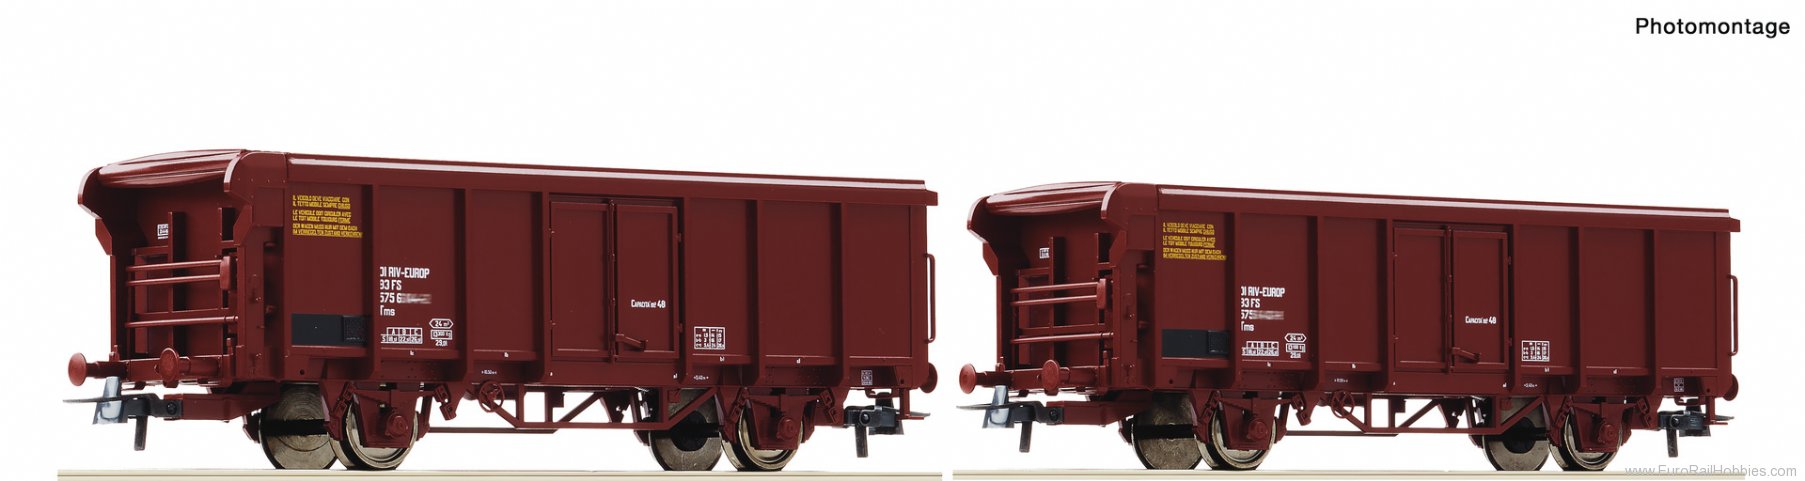 Roco 6600082 2 piece set: Rolling roof wagons, FS